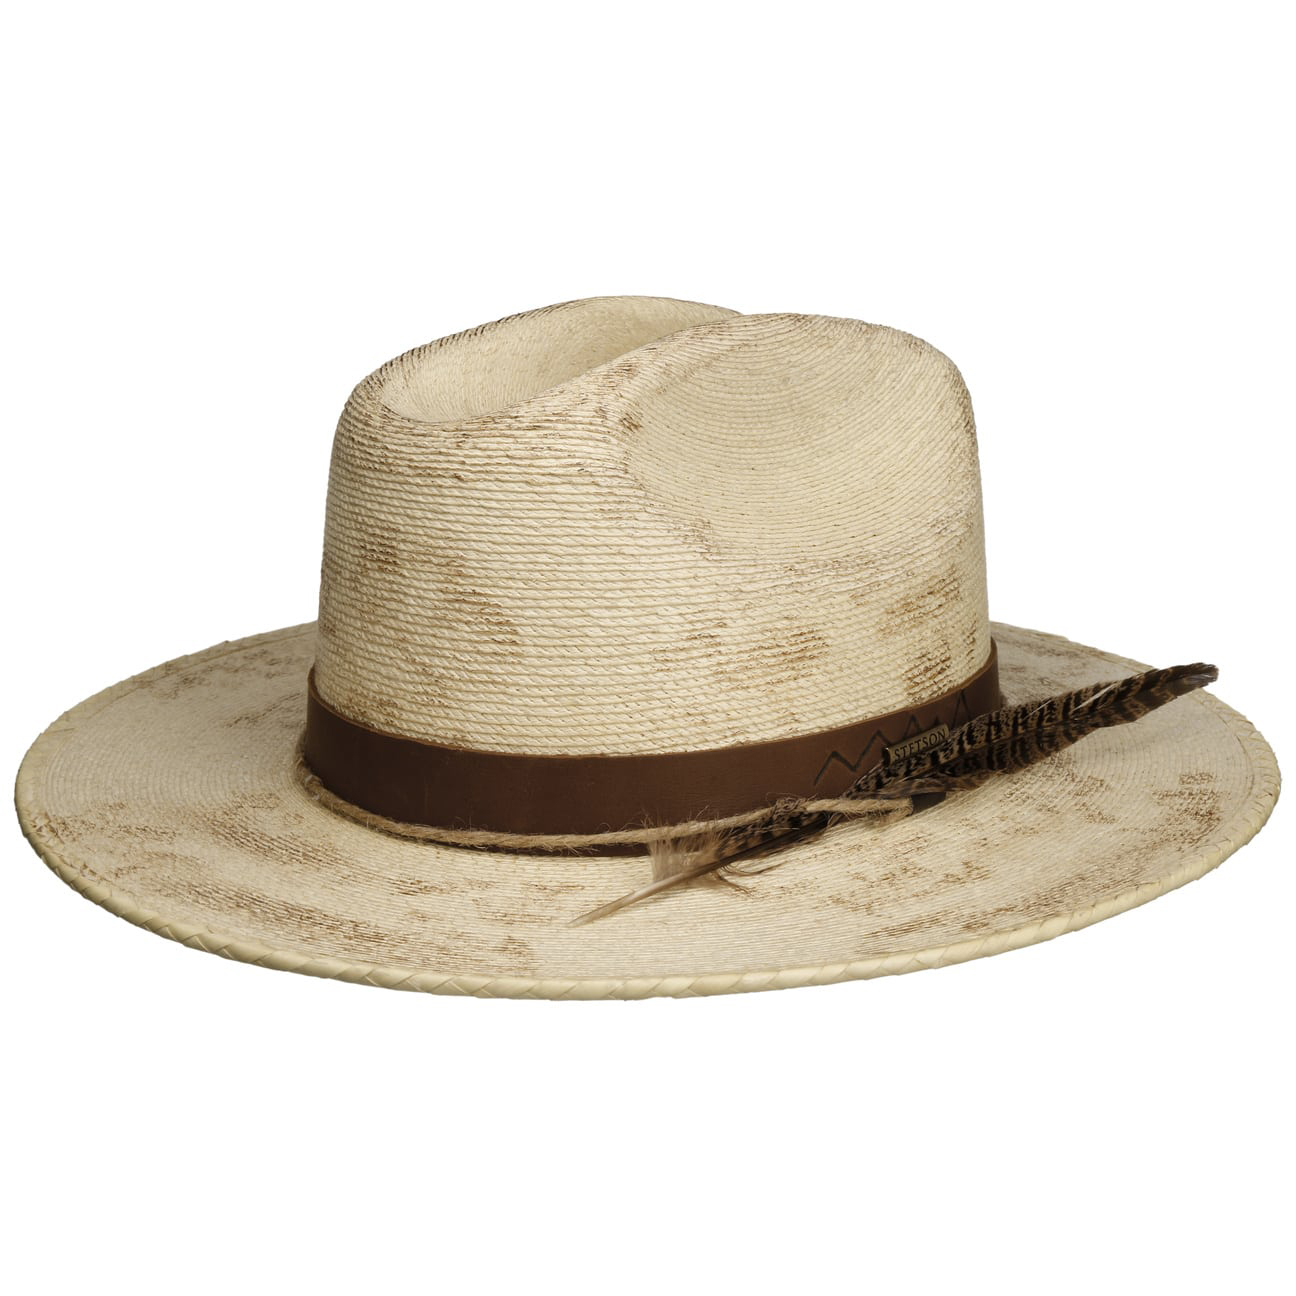 Stetson---Mexican-Palm-Straw-Hat---Nature1